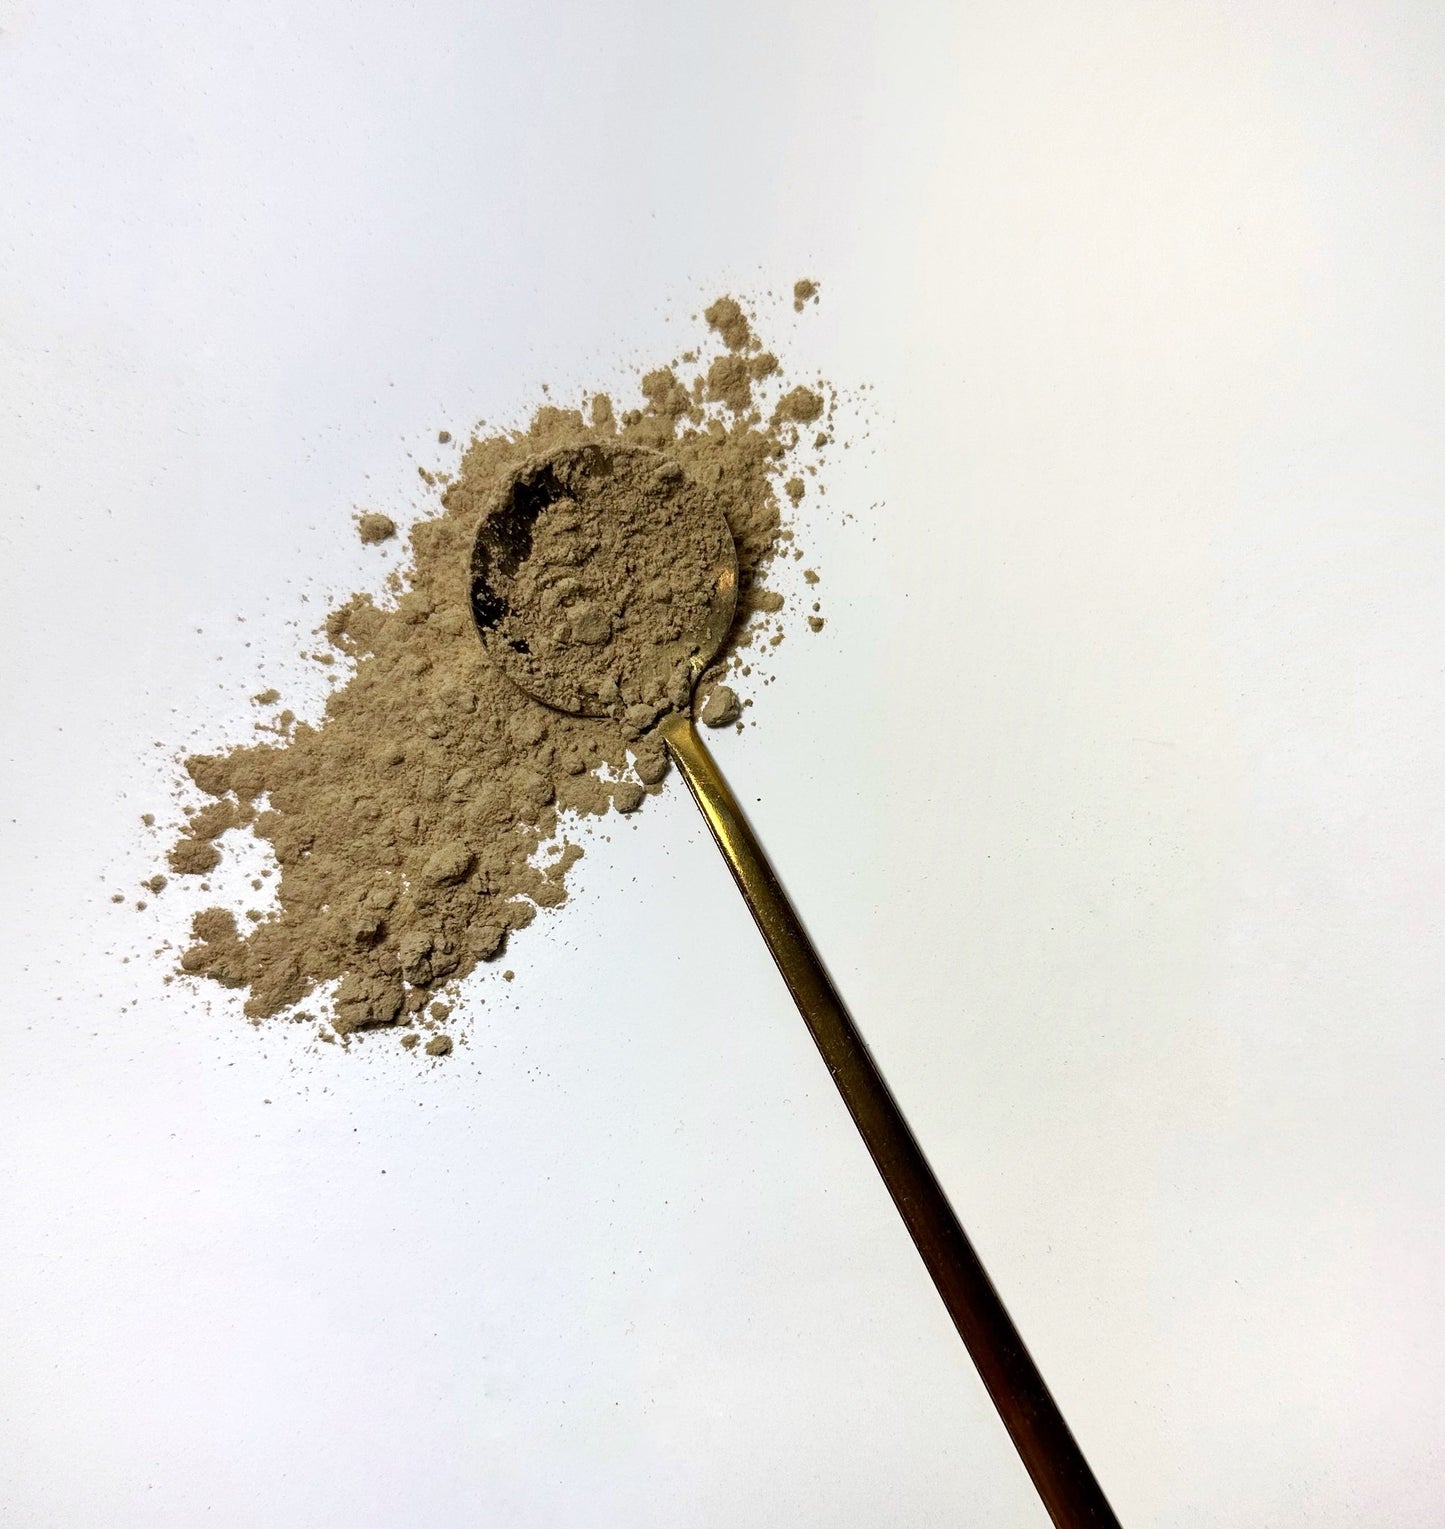 Adri Wellness's fine organic Triphala powder scattered on a white surface with a golden spoon